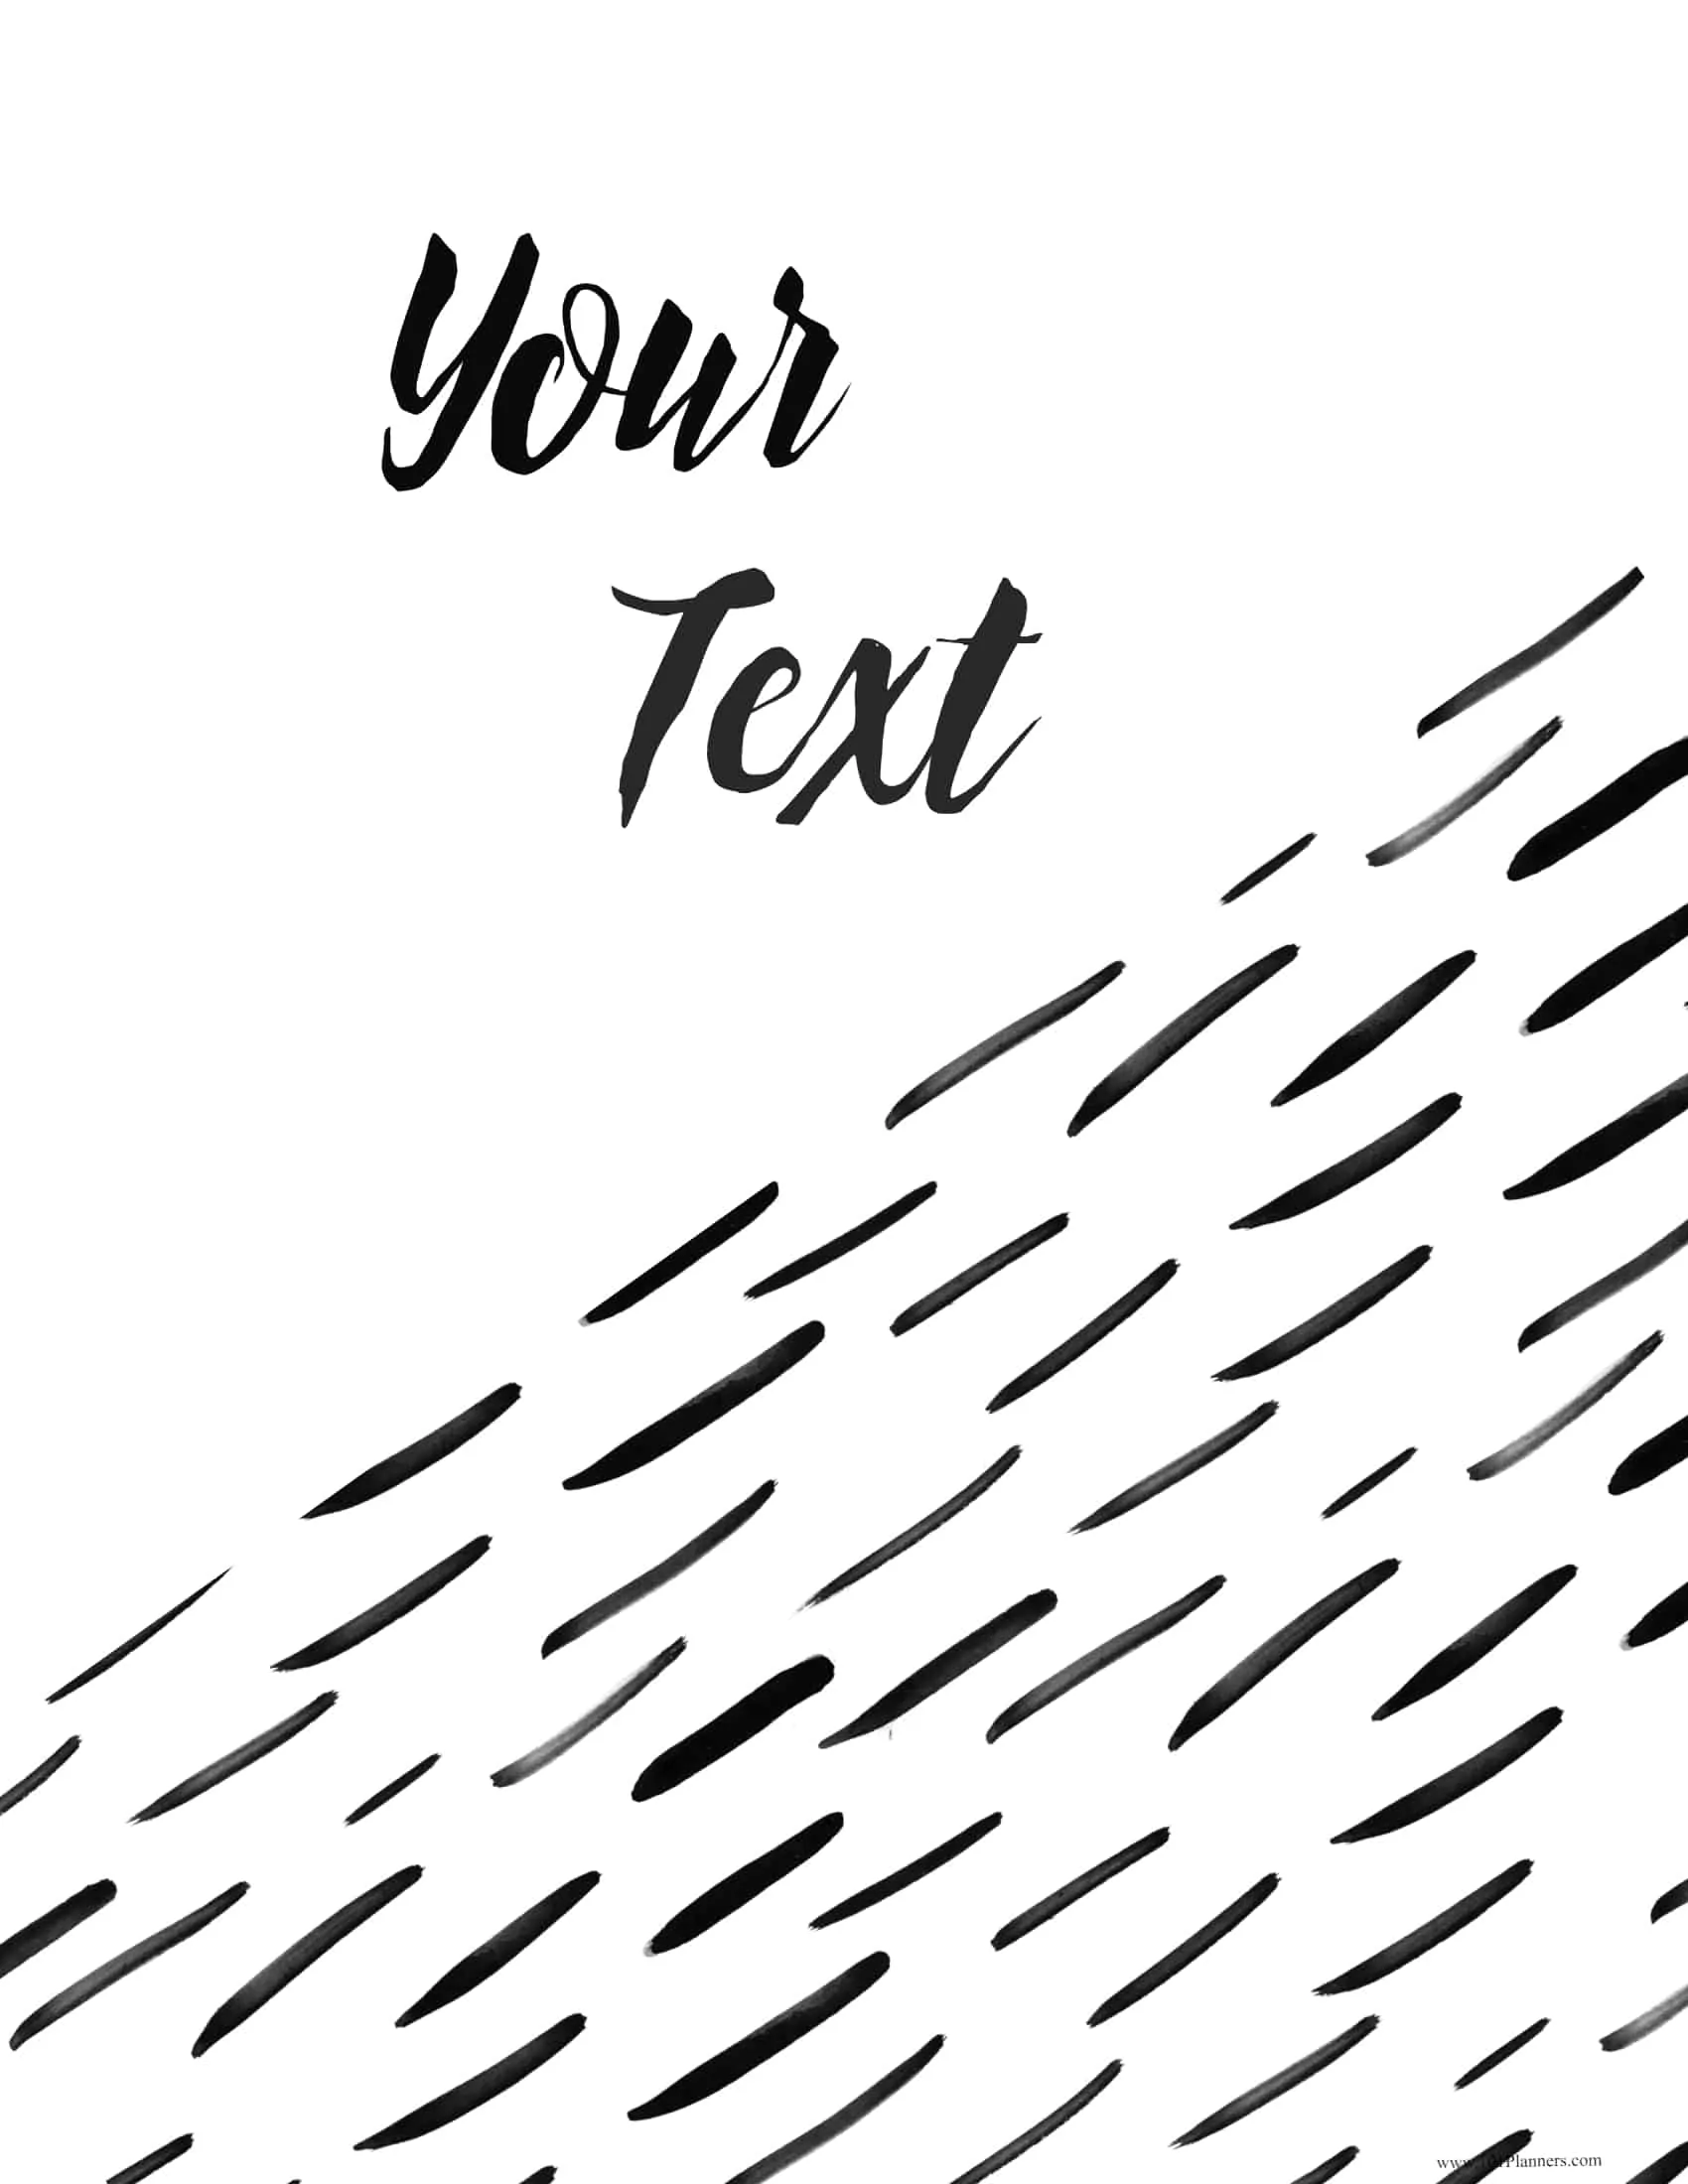 Free Binder Covers Black And White With Custom Text